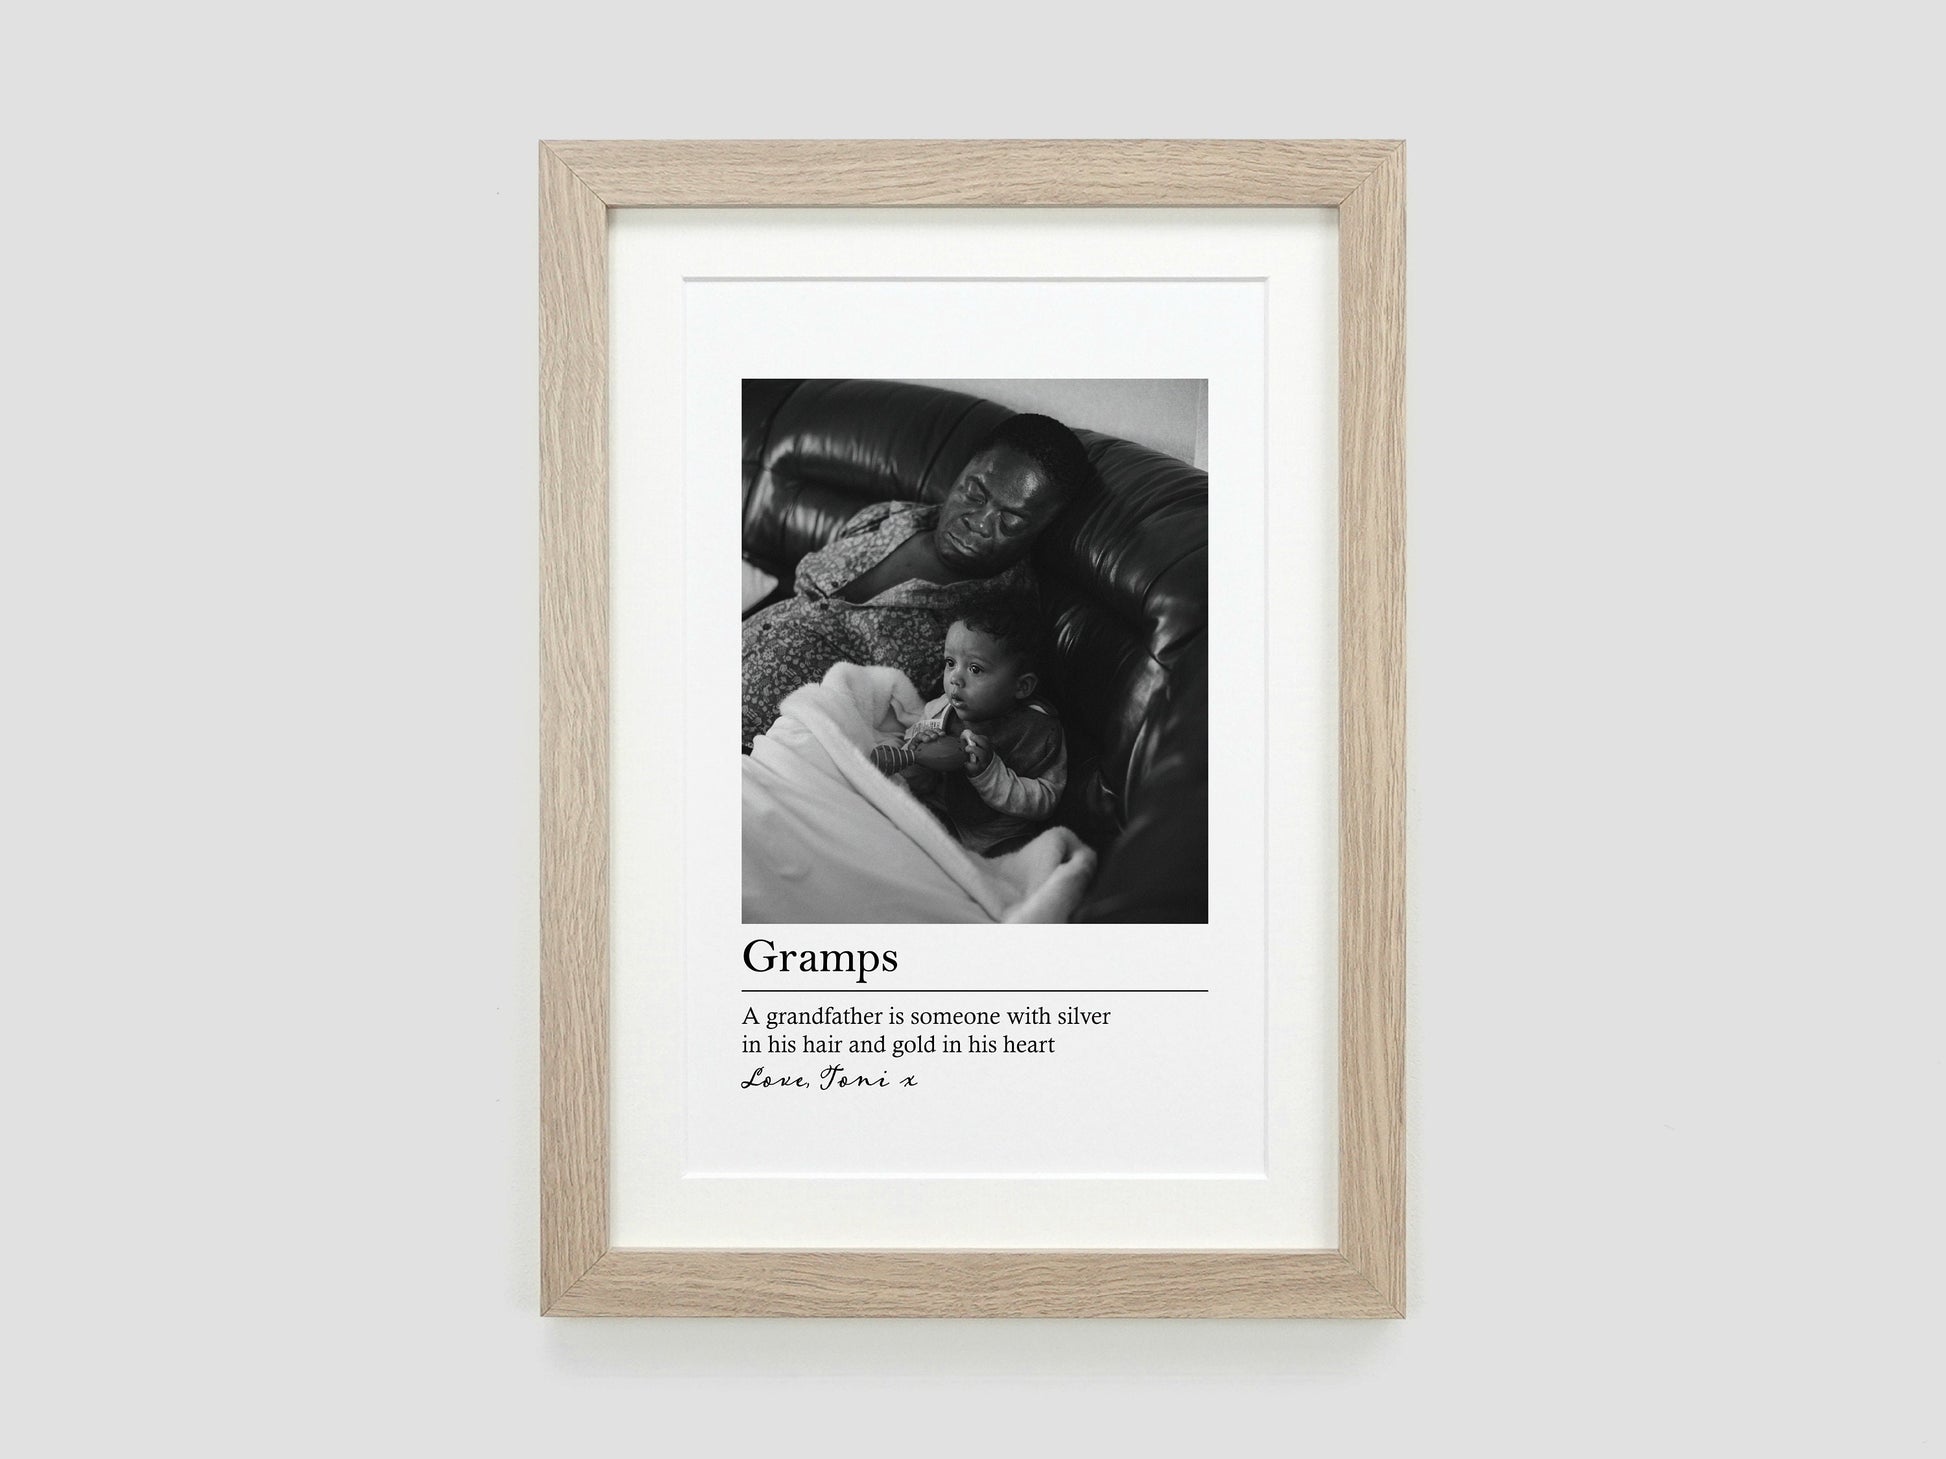 Photo gift for grandparent | Personalised picture gift for grandma grandad | Definition print for nanny or gramps | Birthday present VA065